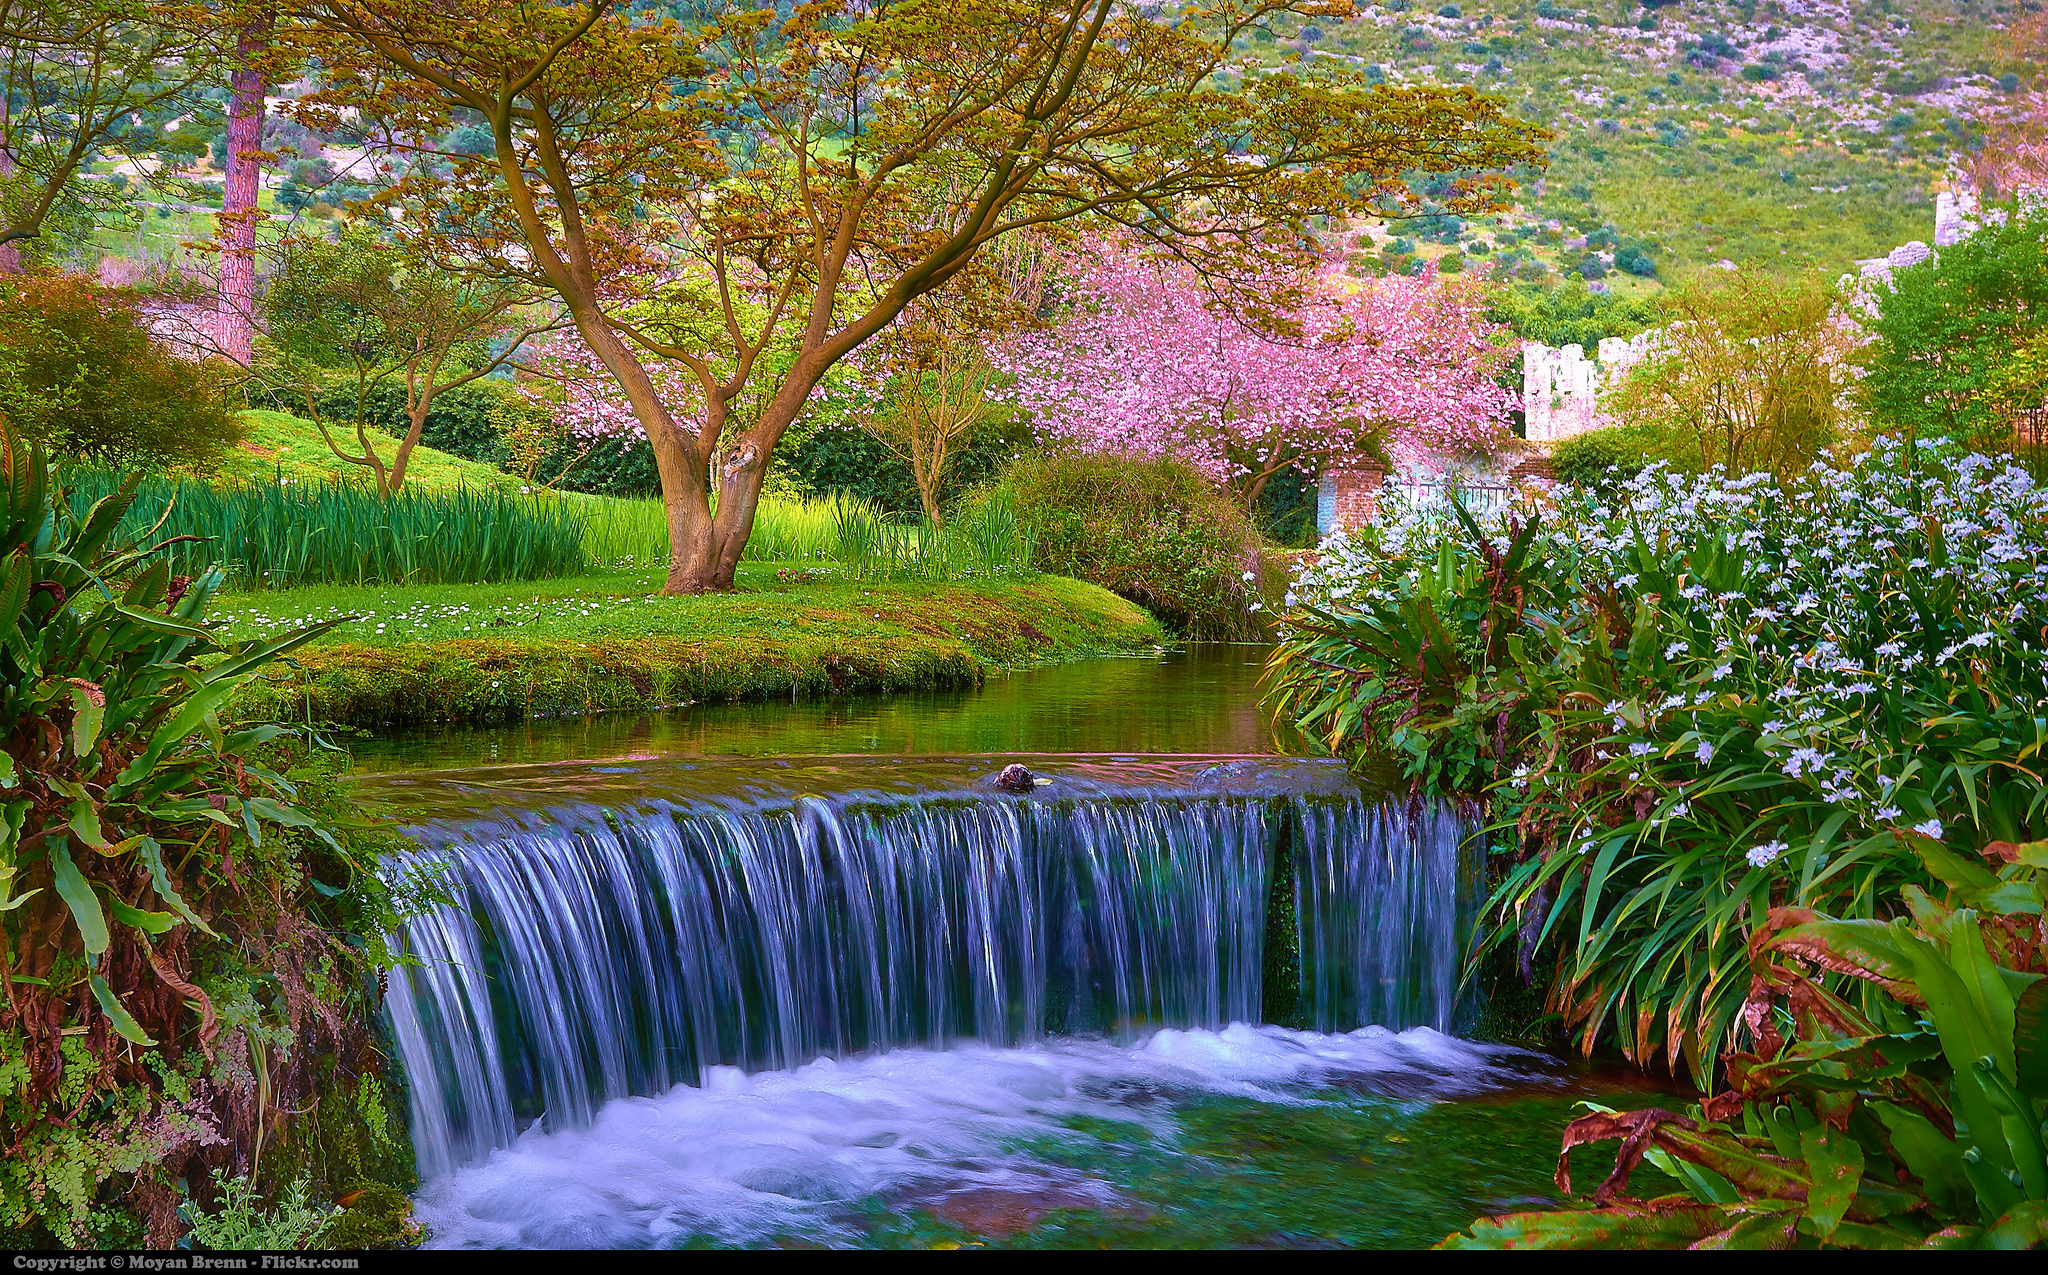 The Most Romantic Garden in the World – The garden of Ninfa